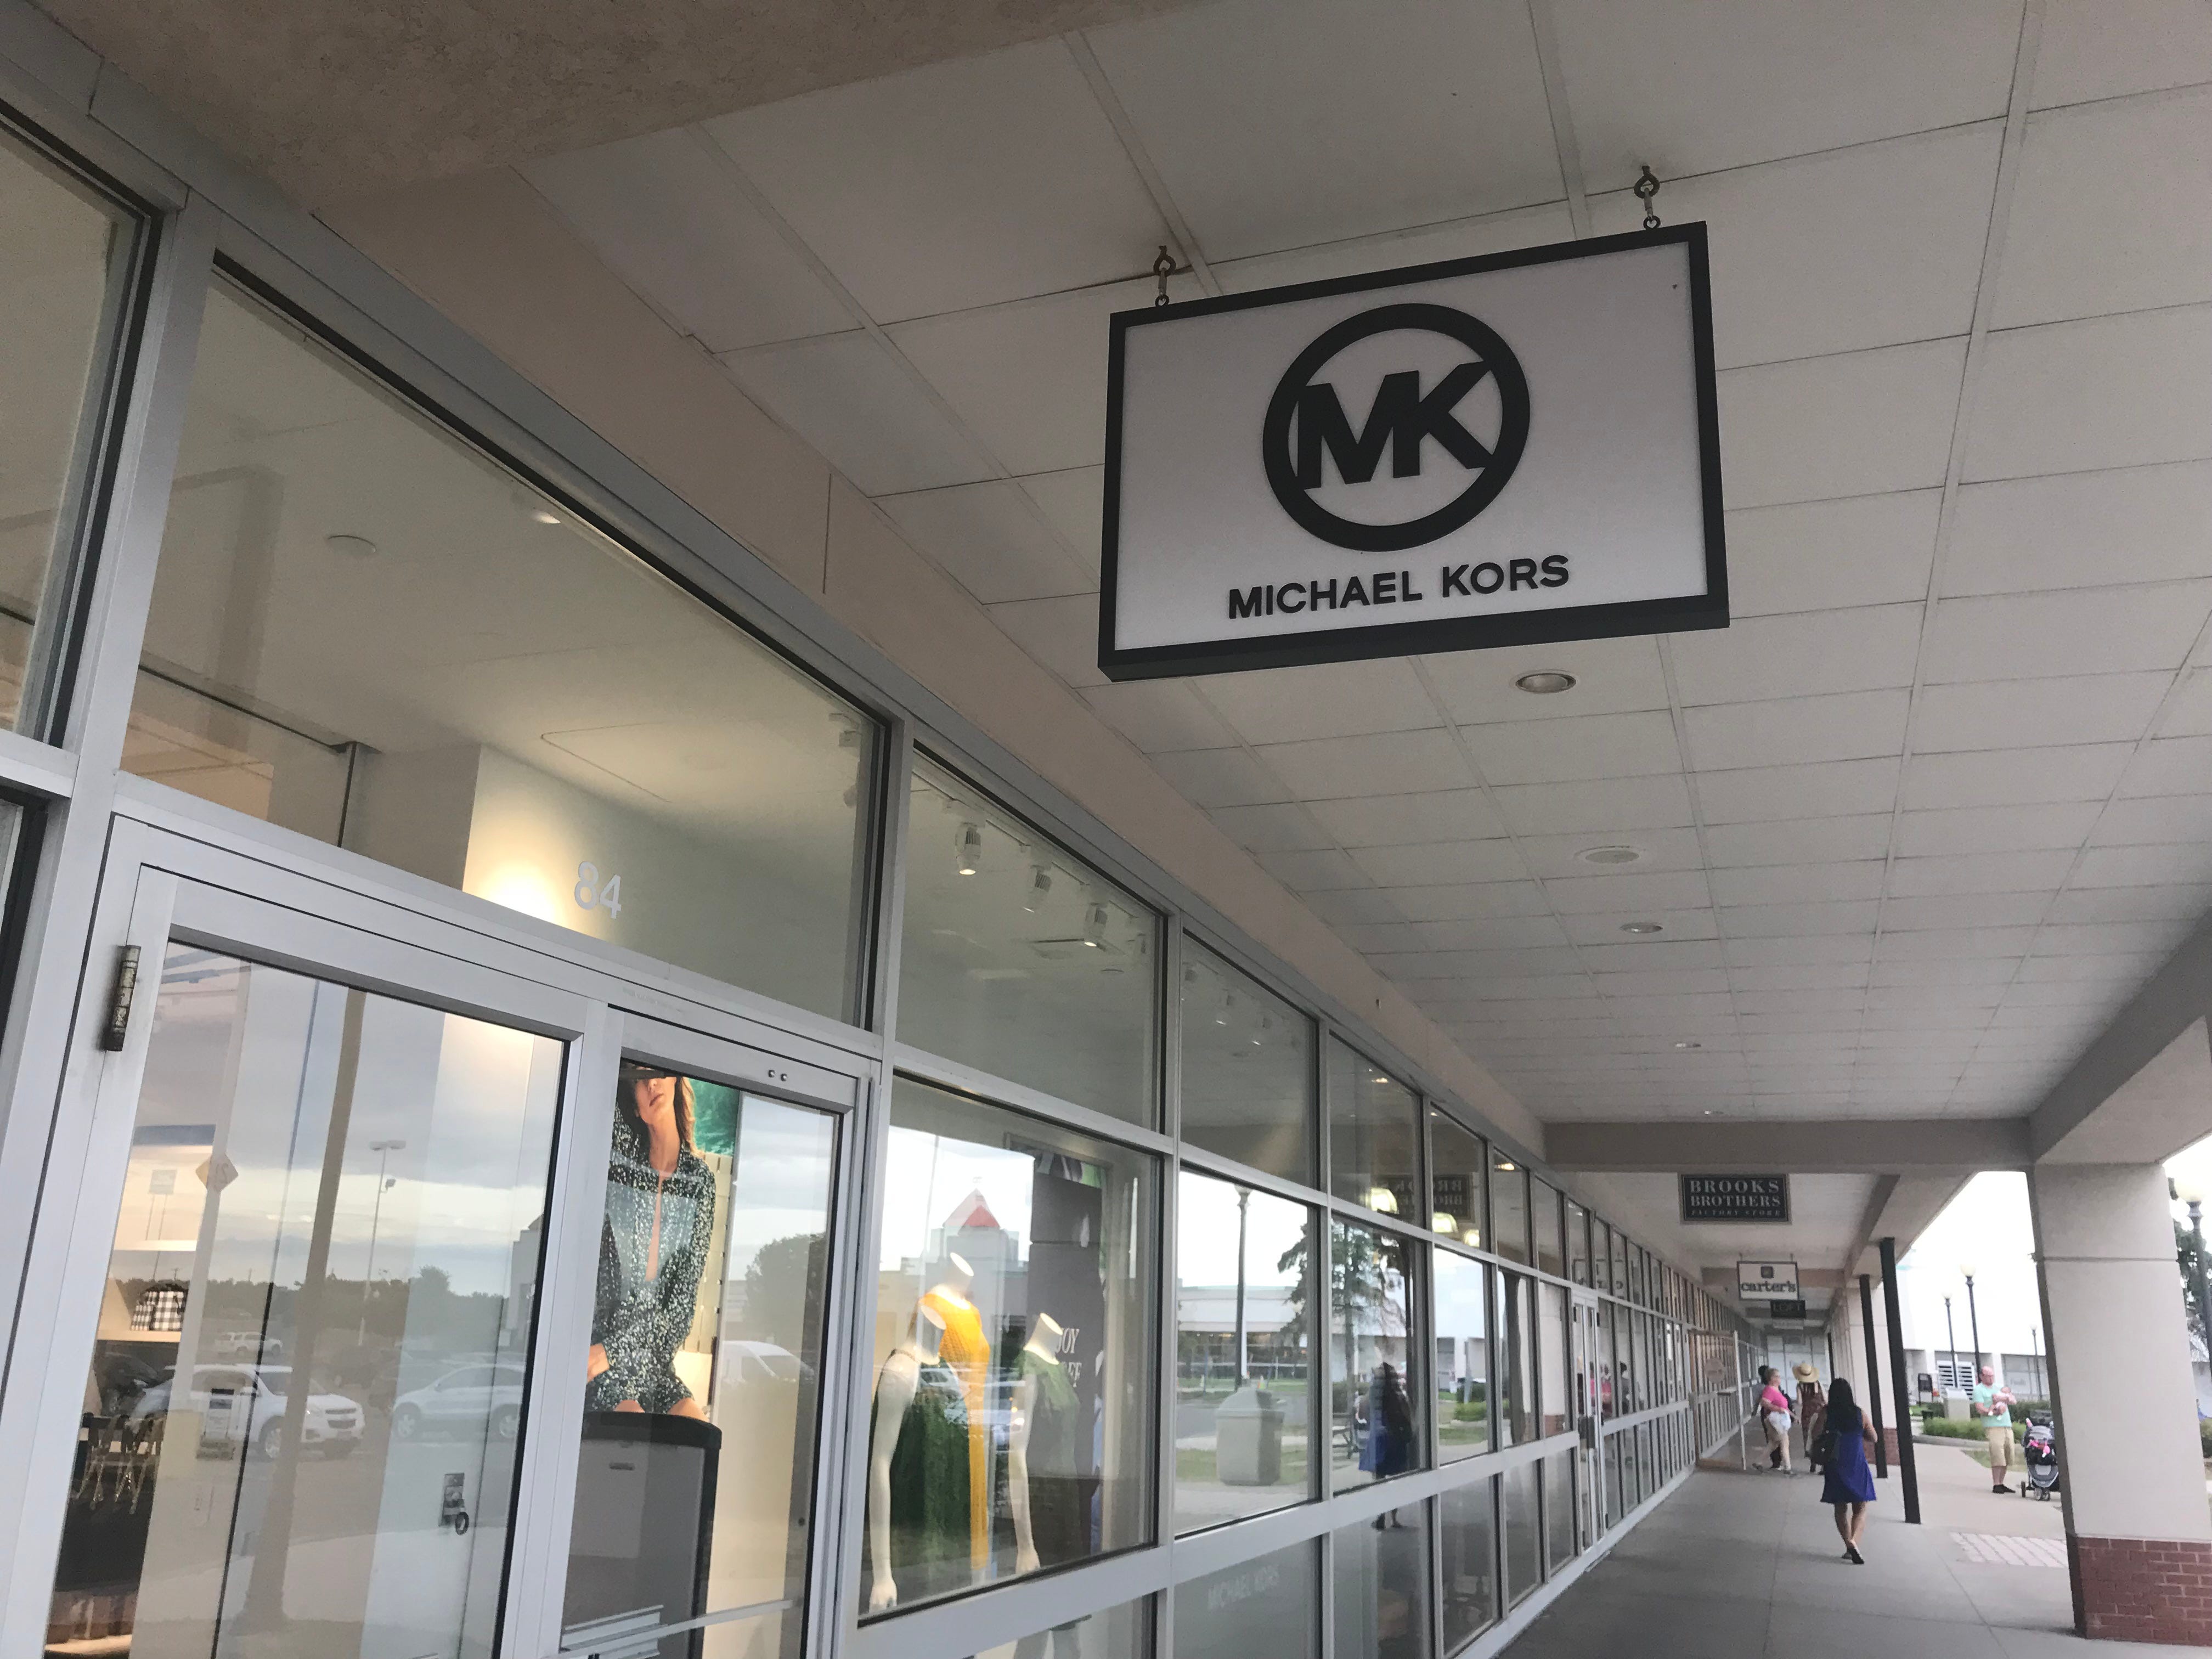 michael kors in square one mall